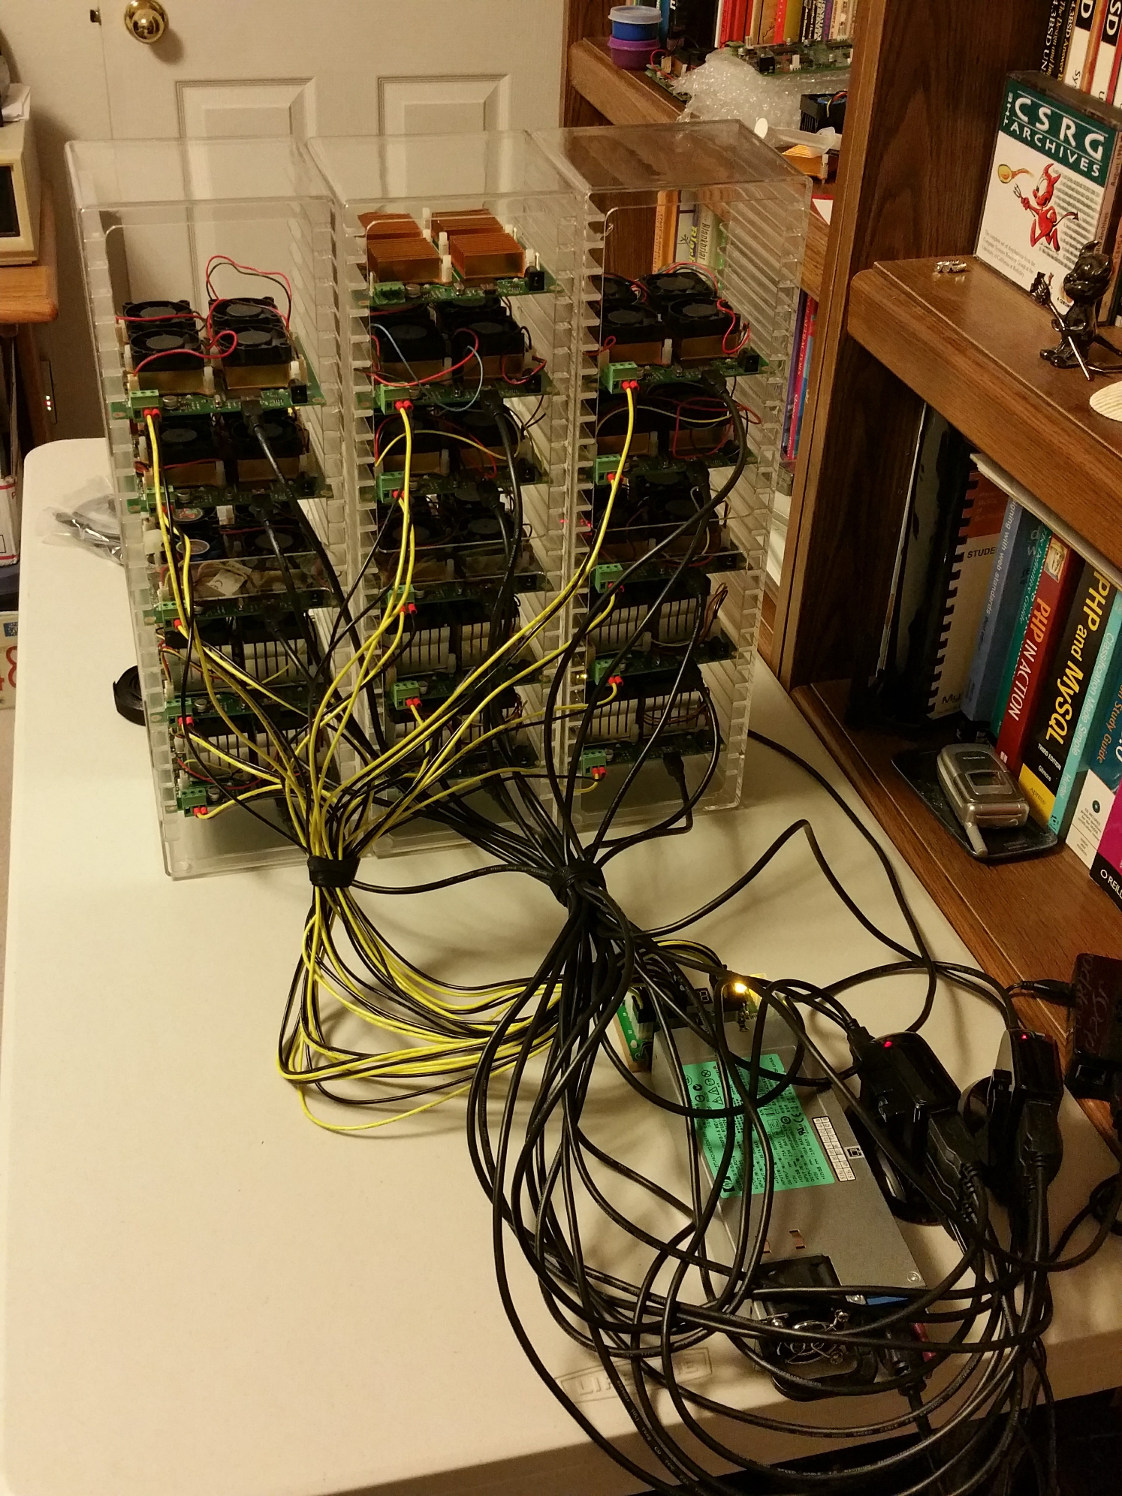 initial cluster, better view of power/USB setup